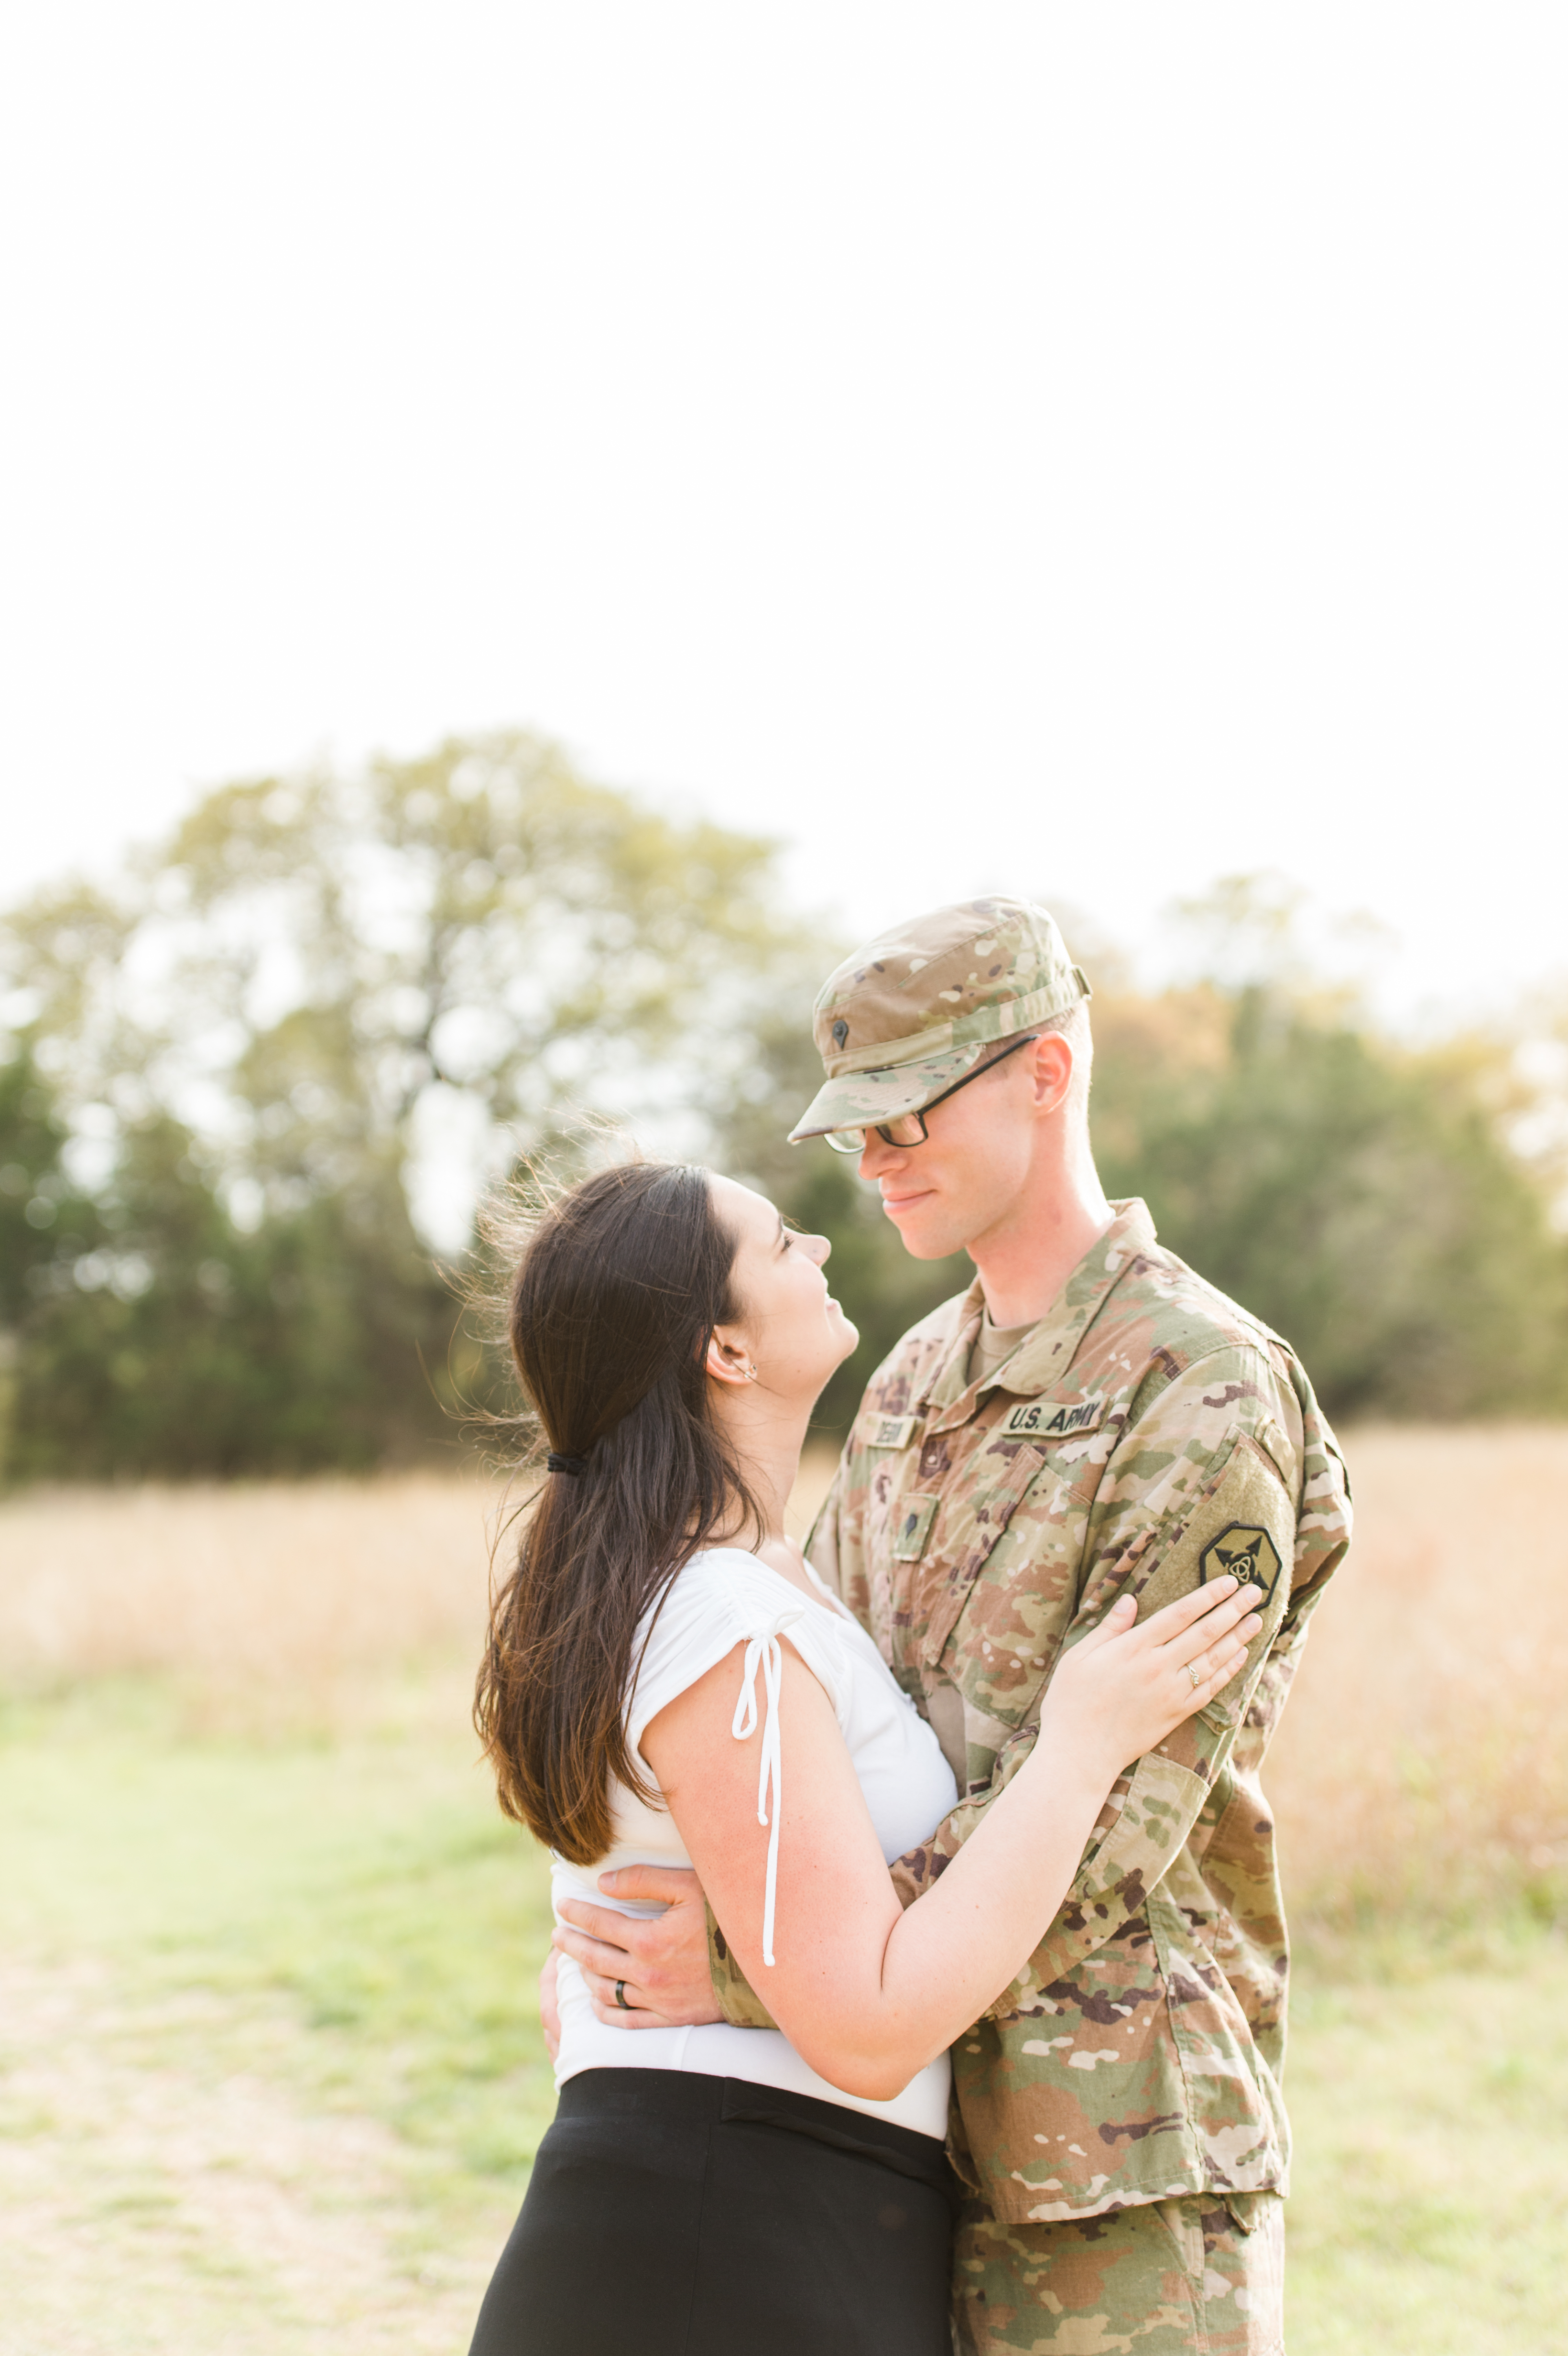 The military couple looks up at each other lovingly.